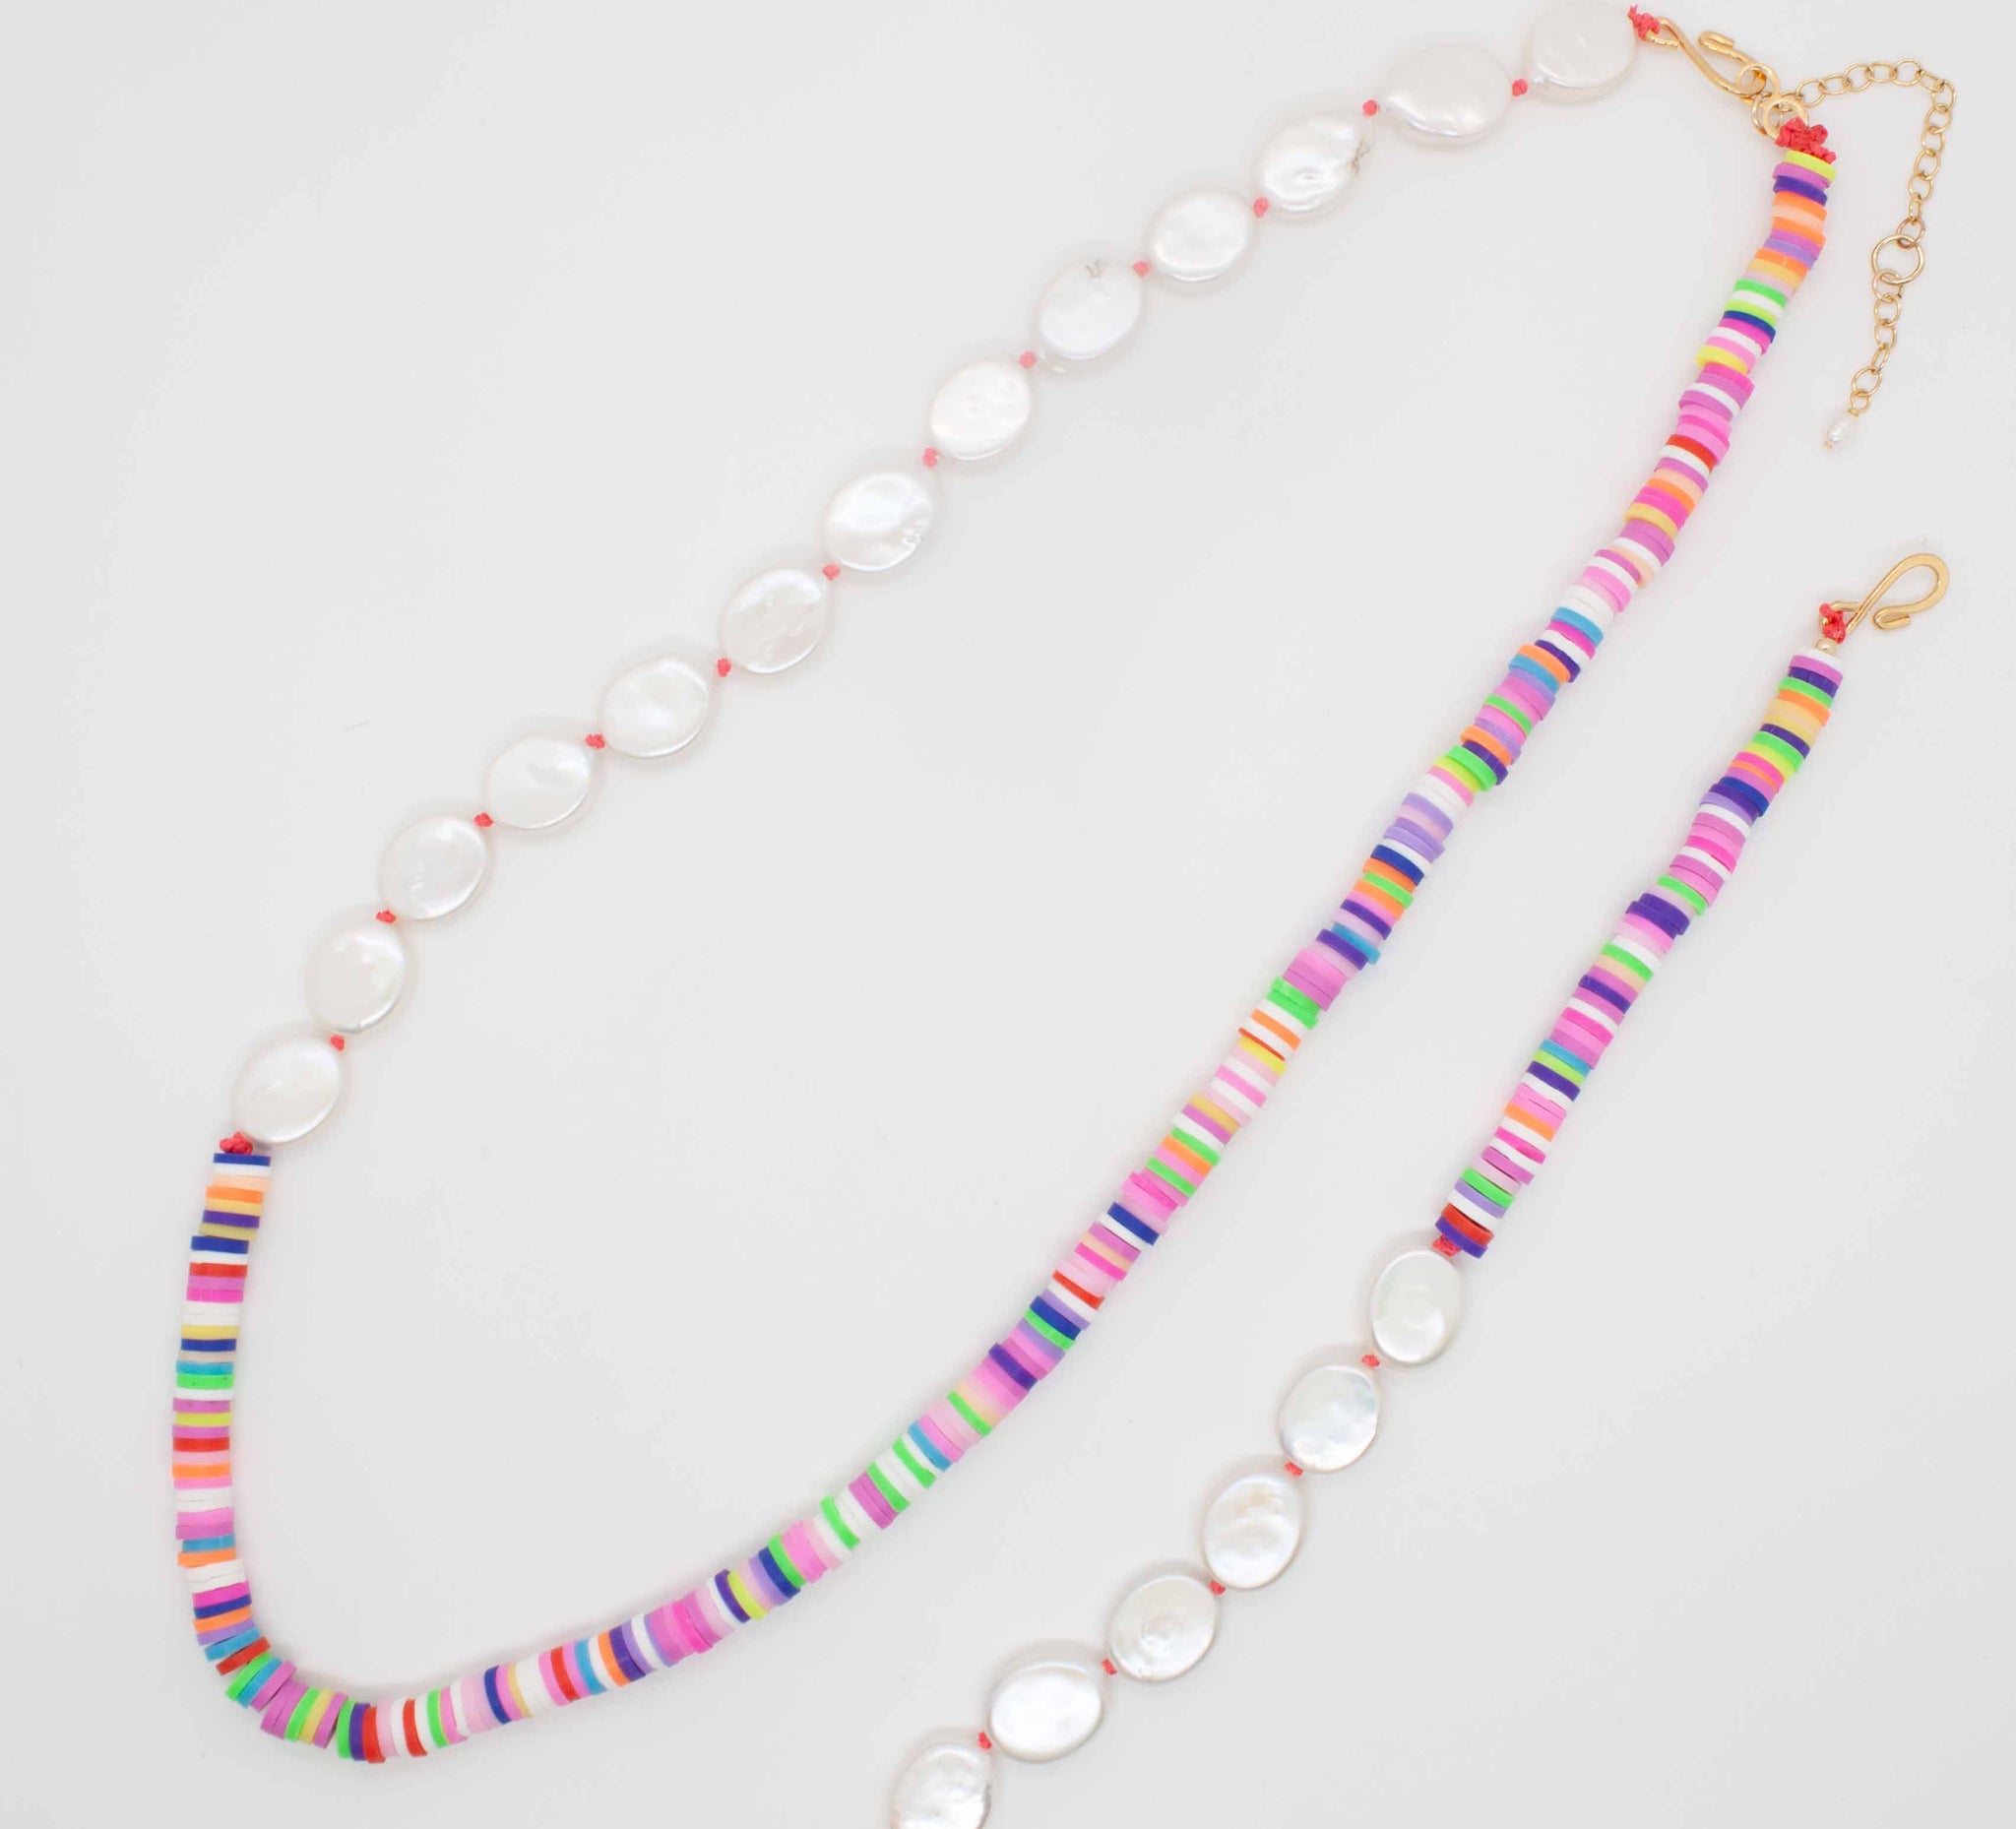 Surprise those traditional pearls with a pop of fun-loving colour! 20 inch (adjustable to 22 inches) hand knotted pearl necklace with multicolour vinyl heishi beads. Handmade in Toronto by kp jewelry co.